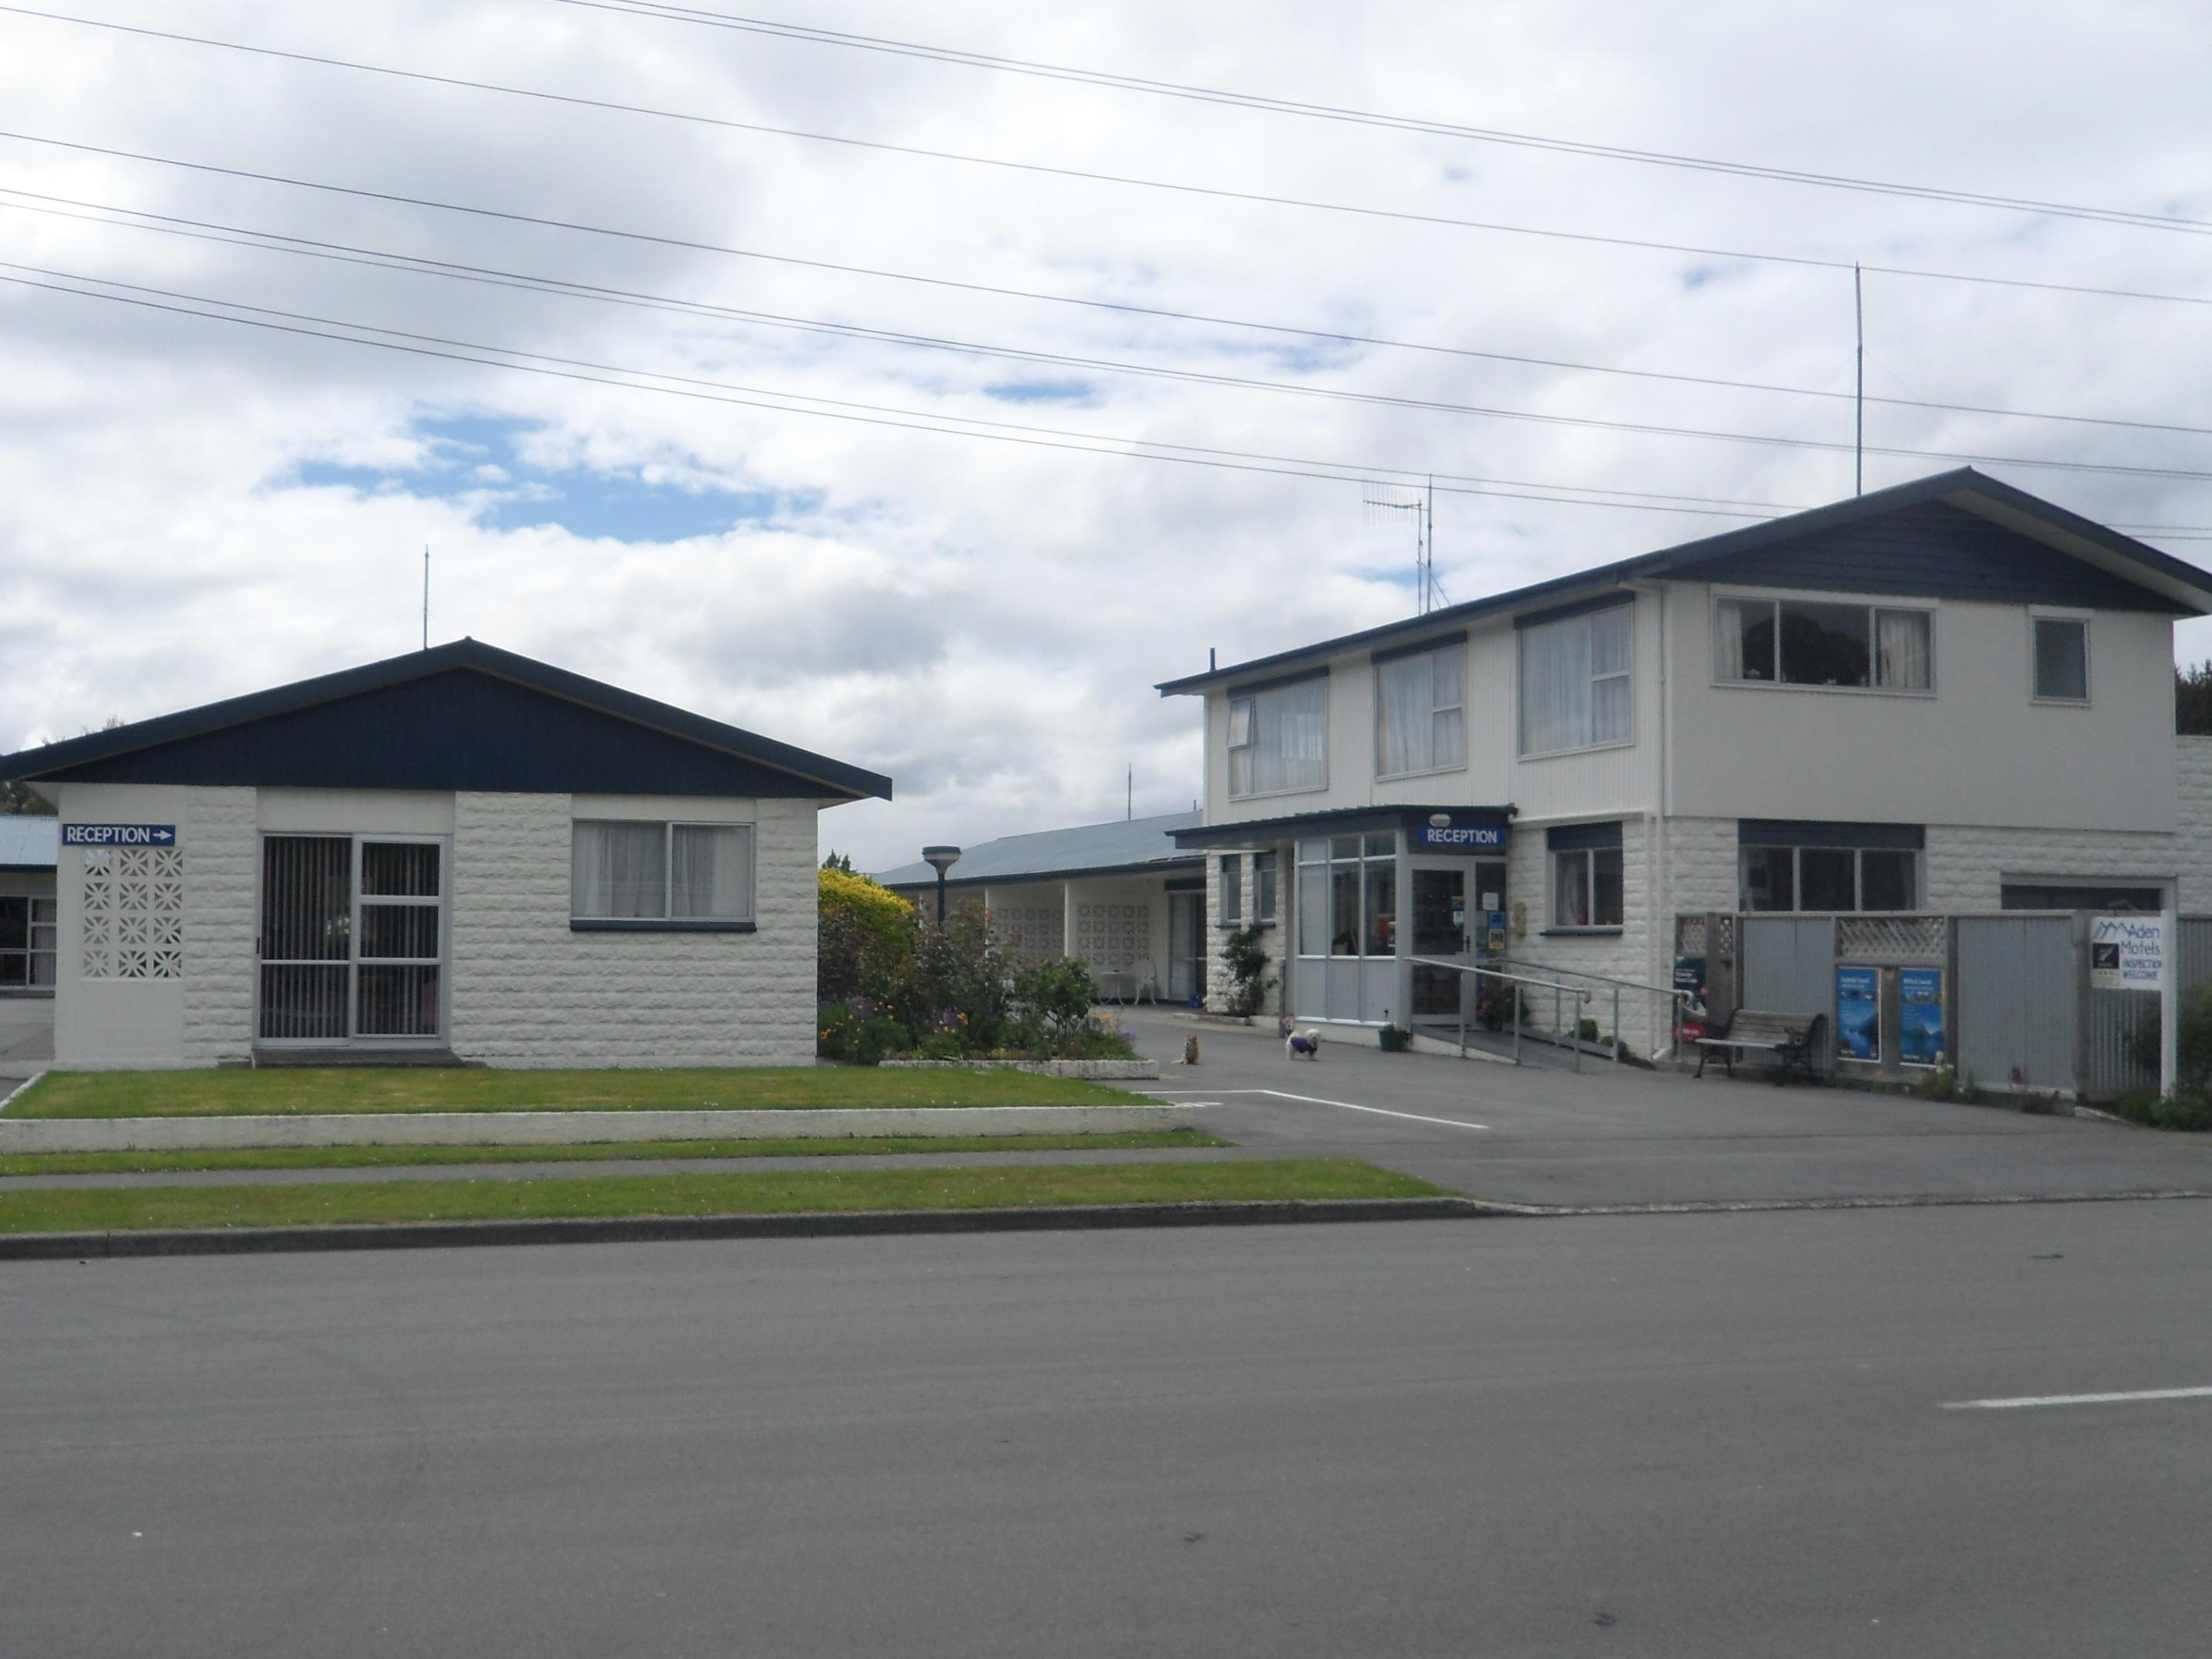 Aden Motel New Zealand FAQ 2016, What facilities are there in Aden Motel New Zealand 2016, What Languages Spoken are Supported in Aden Motel New Zealand 2016, Which payment cards are accepted in Aden Motel New Zealand , New Zealand Aden Motel room facilities and services Q&A 2016, New Zealand Aden Motel online booking services 2016, New Zealand Aden Motel address 2016, New Zealand Aden Motel telephone number 2016,New Zealand Aden Motel map 2016, New Zealand Aden Motel traffic guide 2016, how to go New Zealand Aden Motel, New Zealand Aden Motel booking online 2016, New Zealand Aden Motel room types 2016.